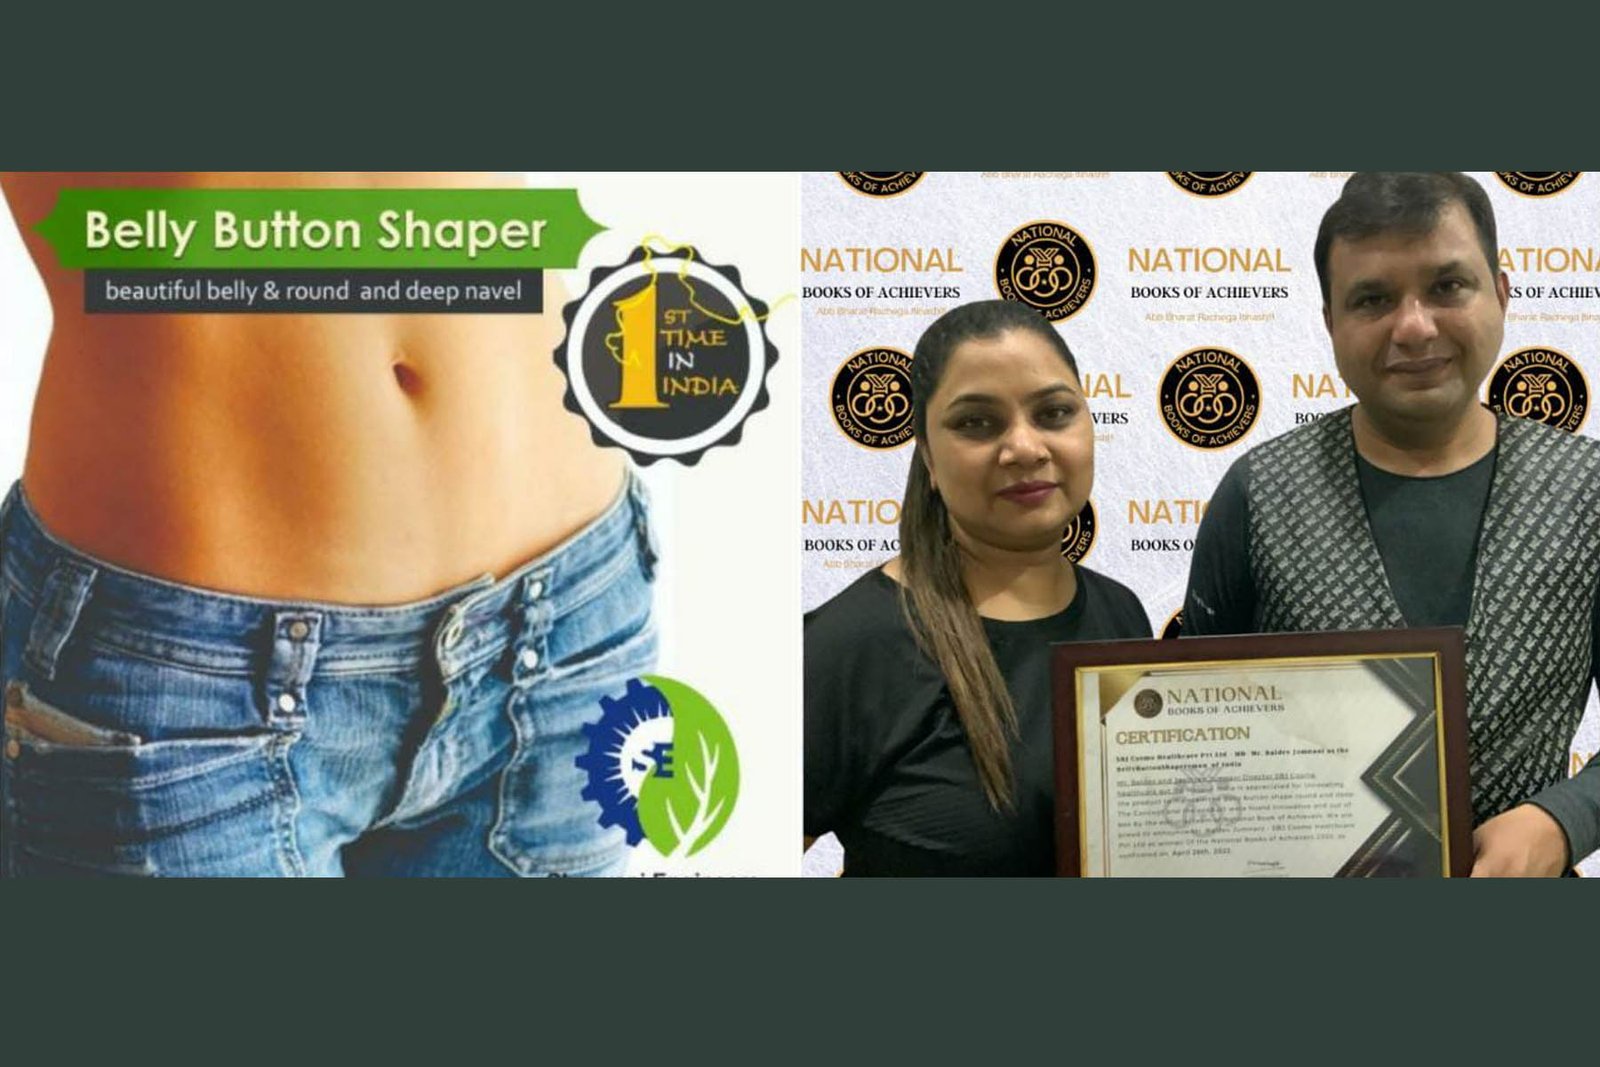 SBJ Cosmo Healthcare Pvt. Ltd, MD- Mr. Baldev Jumnani Grabs the National Book of Achievers for Belly Button Shapperman of India